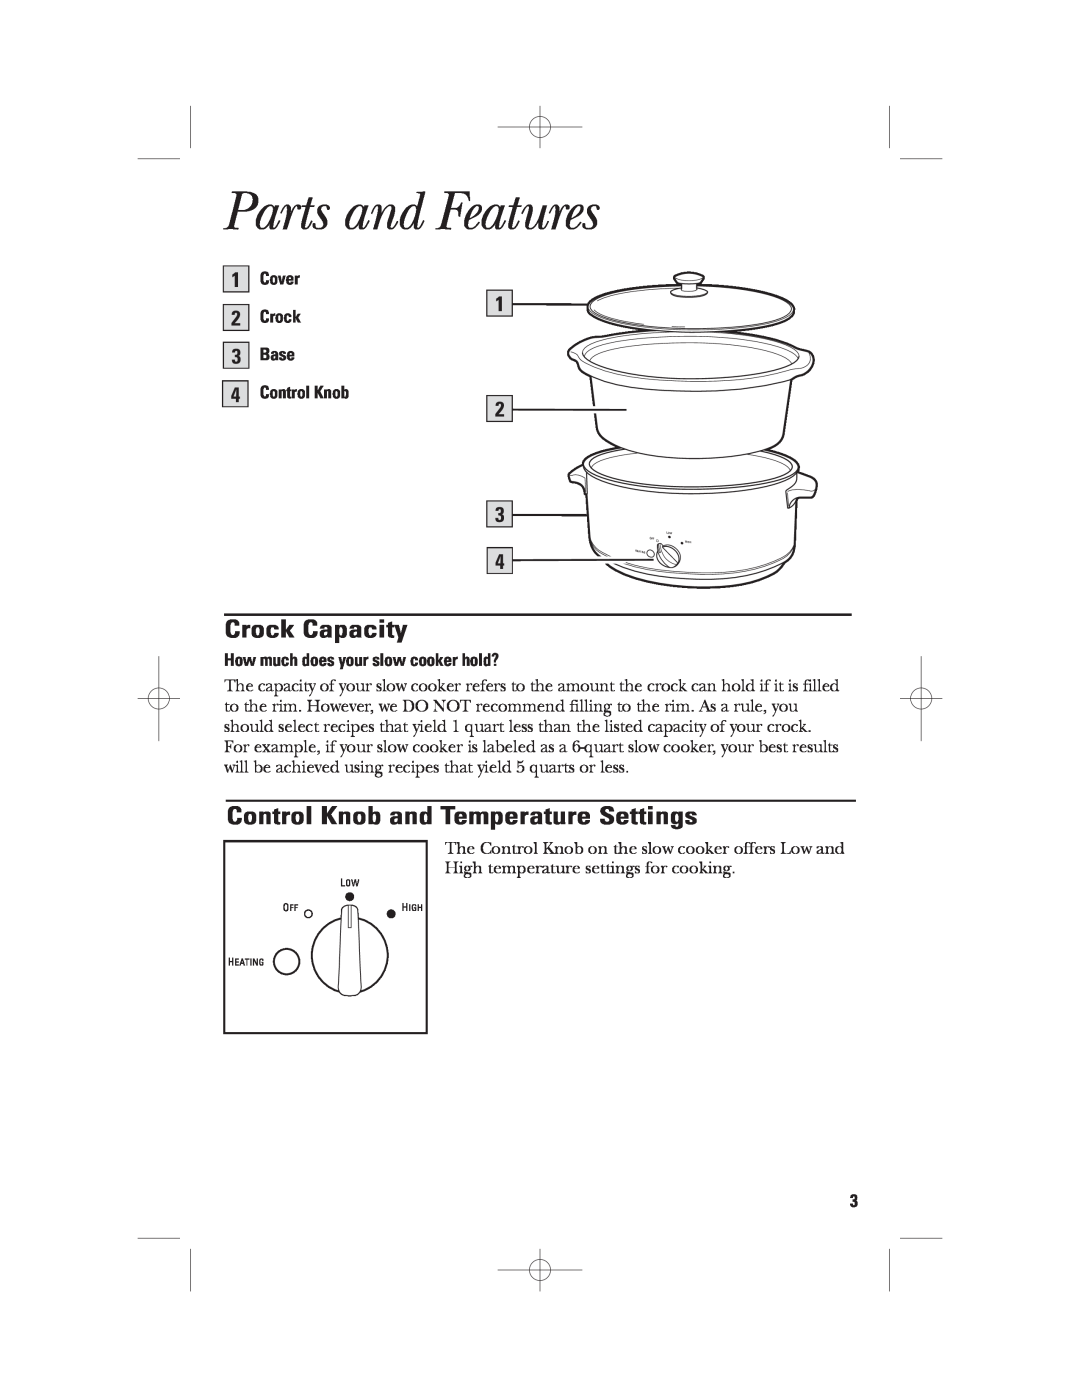 GE 169016 manual Parts and Features, Crock Capacity, Control Knob and Temperature Settings 